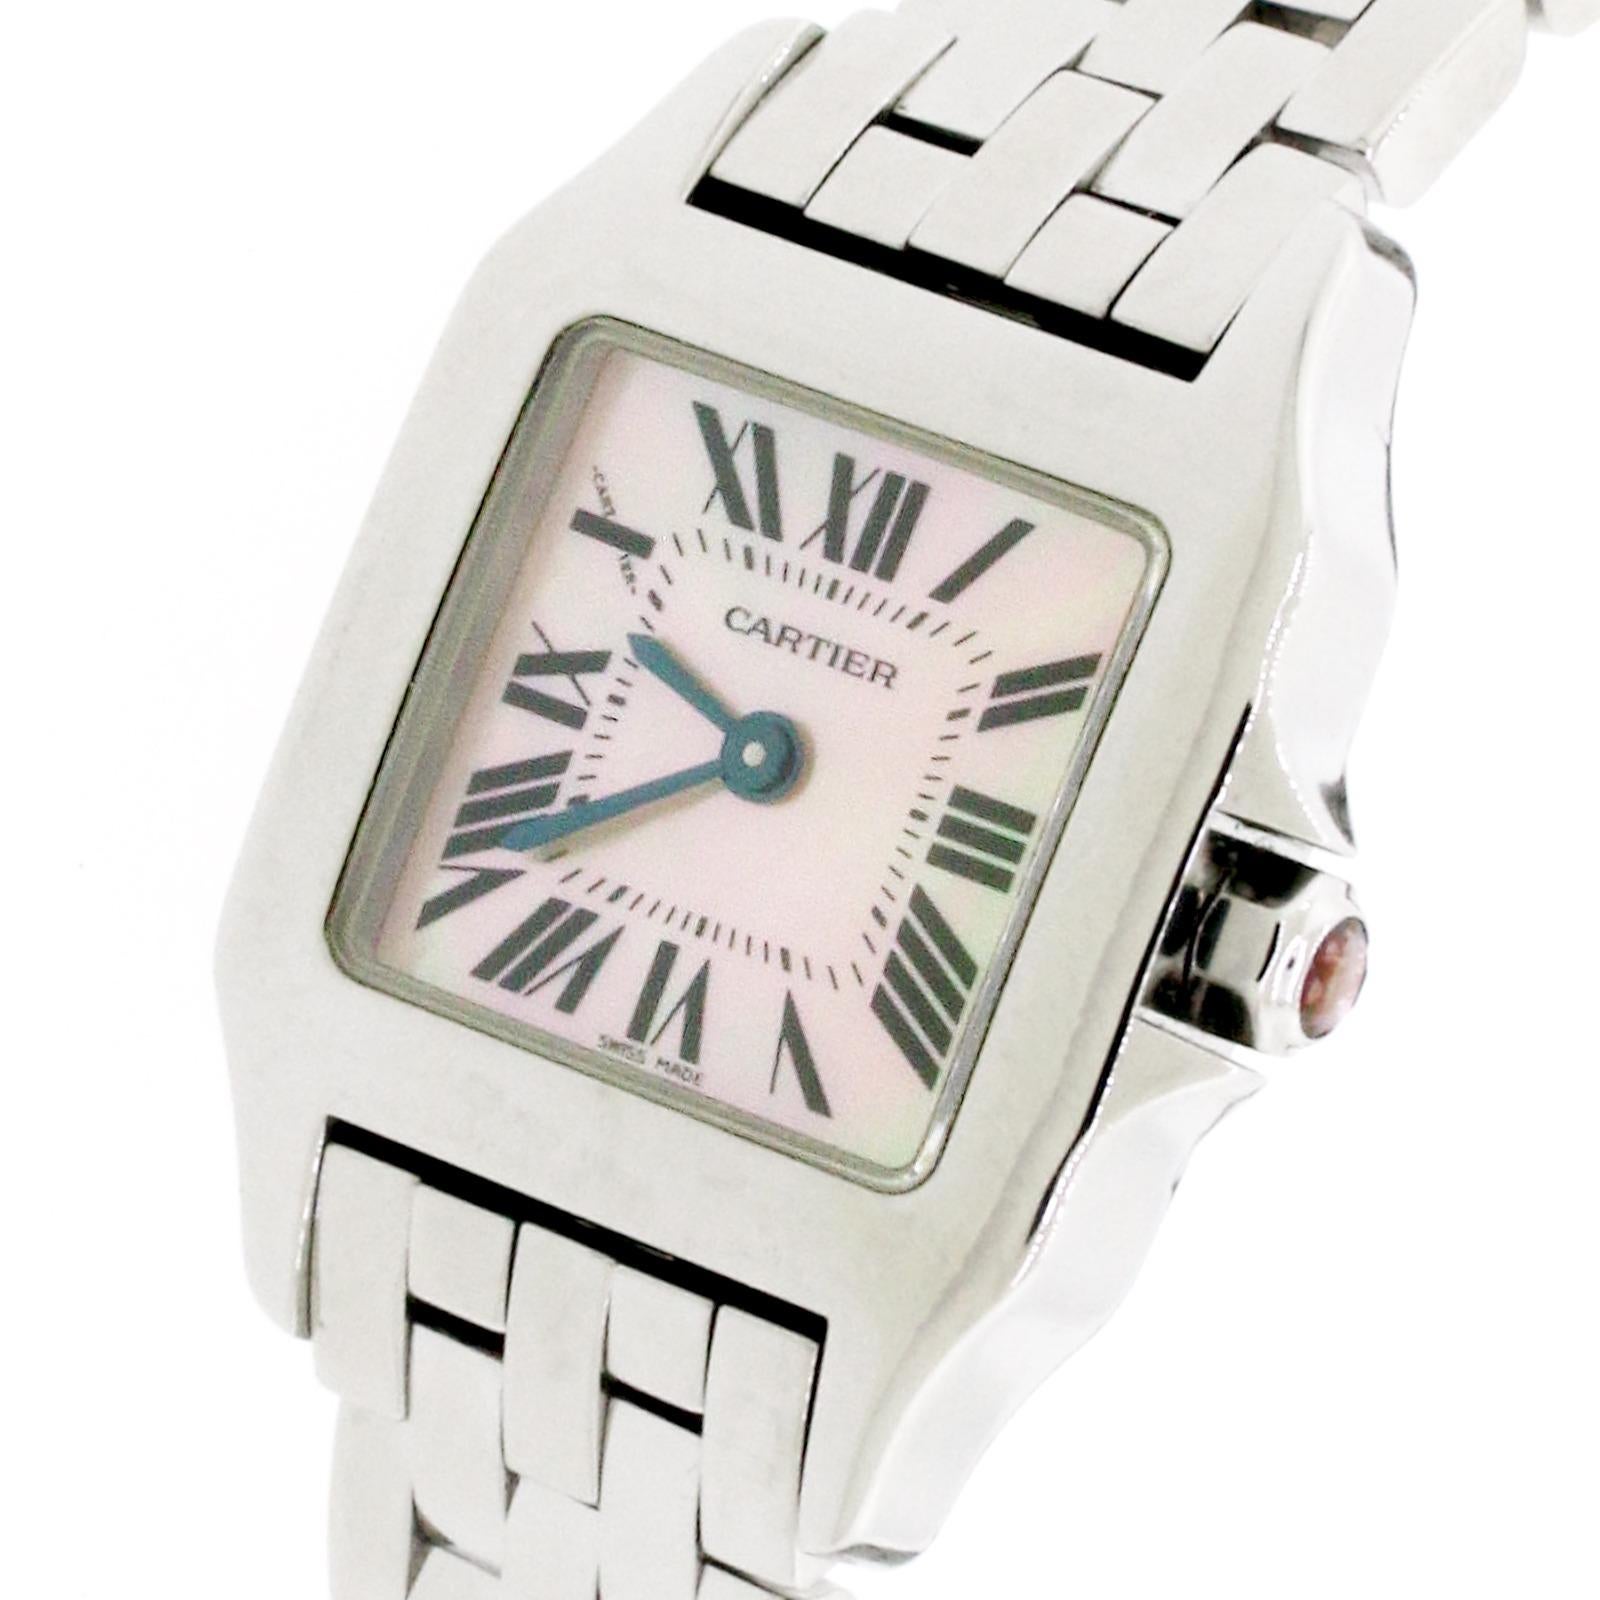 Cartier Santos Demoiselle Stainless Steel Ladies Watch, Ref. W25075Z5. Quartz movement. Stainless steel 21mm case. Cartier mother-of-pearl (MOP) dial with Roman numerals. Stainless steel bezel. Functions: hours and minutes. Cartier stainless steel